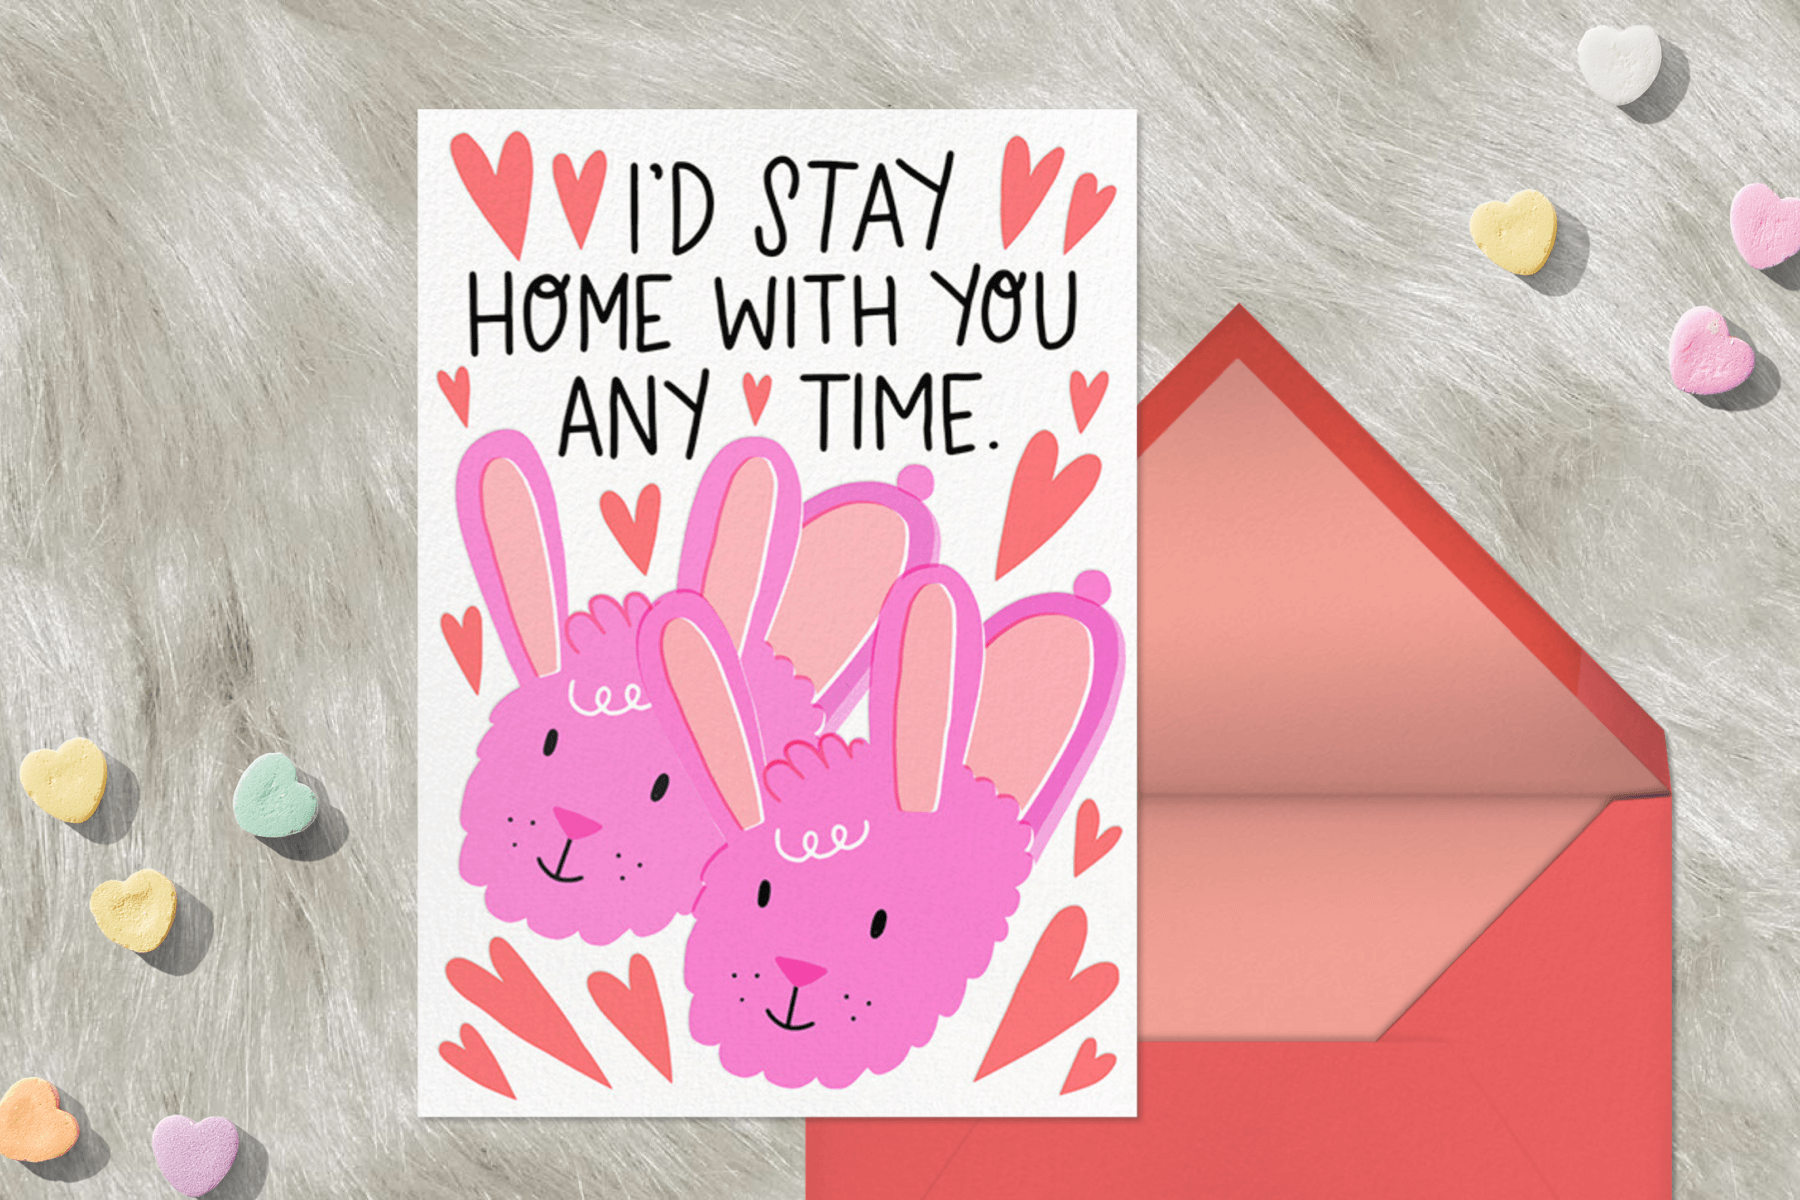 A Valentine’s Day card with an illustration of smiling bunny slippers.